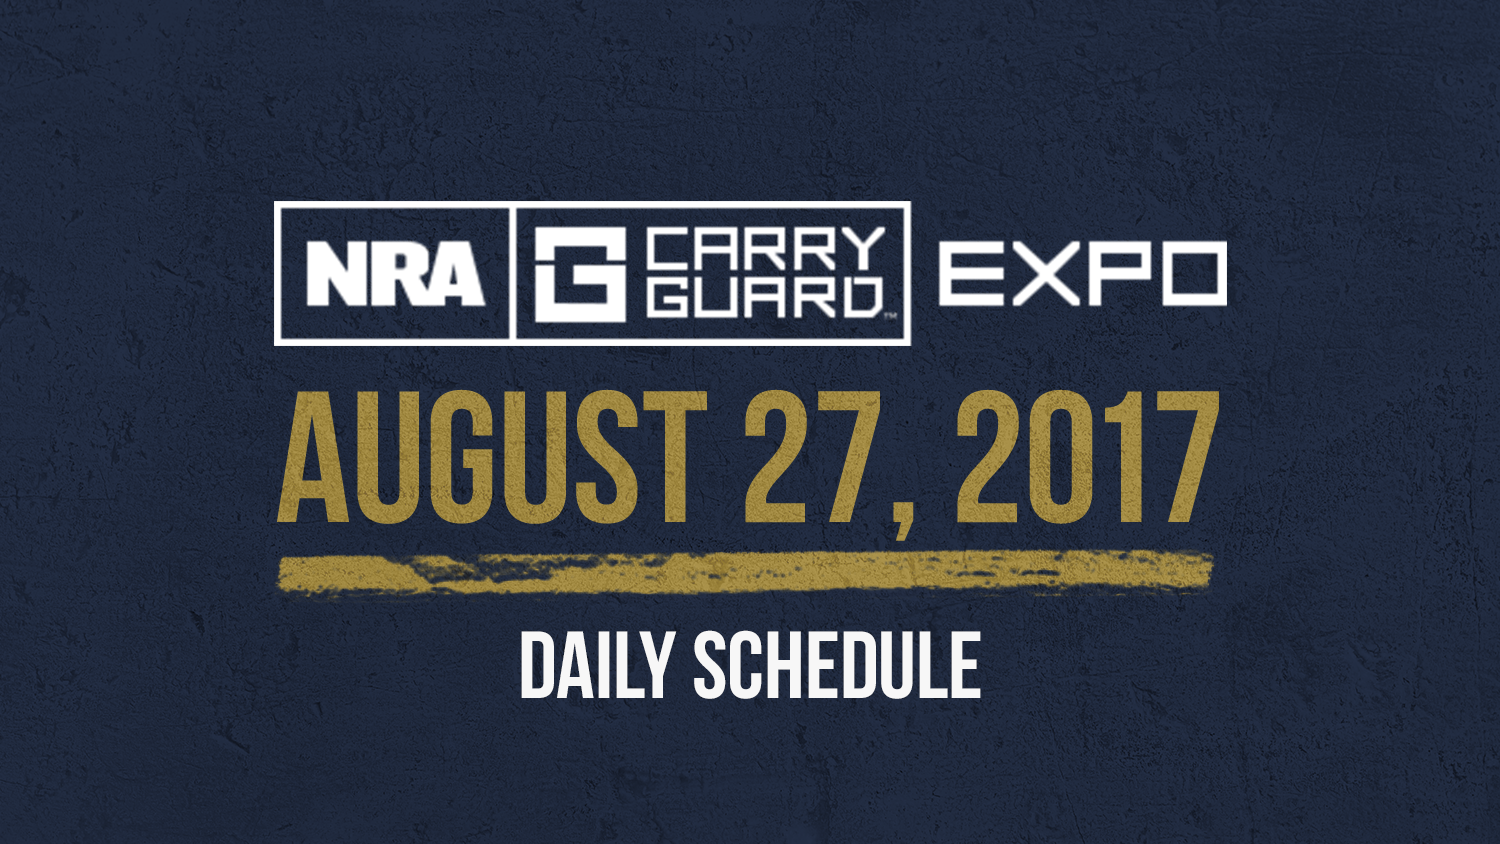 NRA Carry Guard Expo Events: Sunday, August 27th